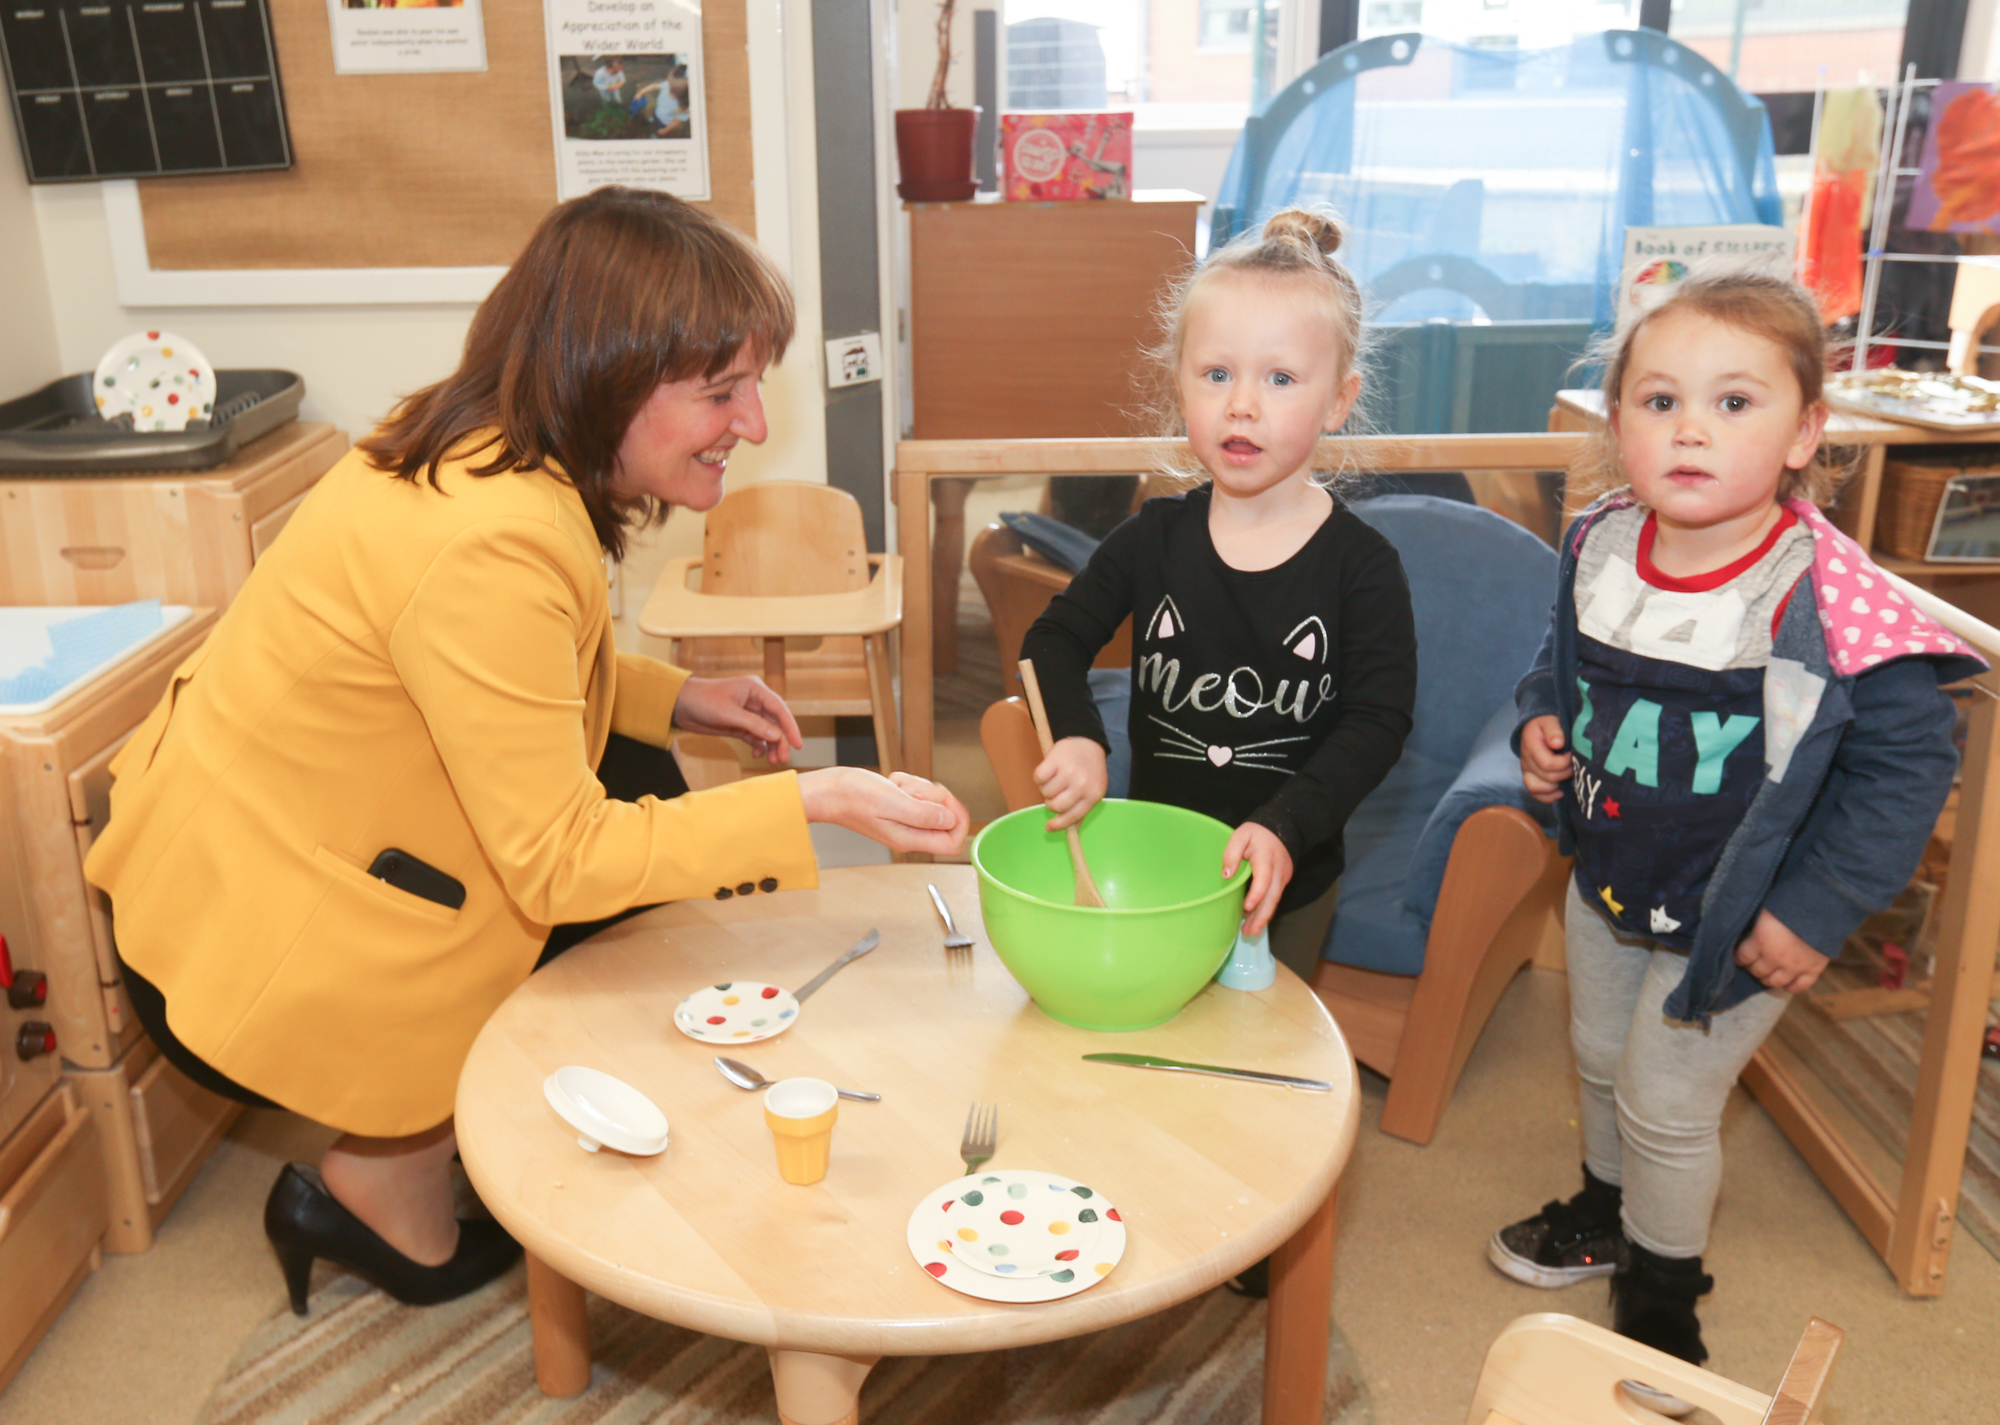 The Treetop Family Nurture Centre in Inverkeithing has been named an early learning and childcare setting of innovation by the Scottish Government, and children's minister Maree Todd paid a visit recently.